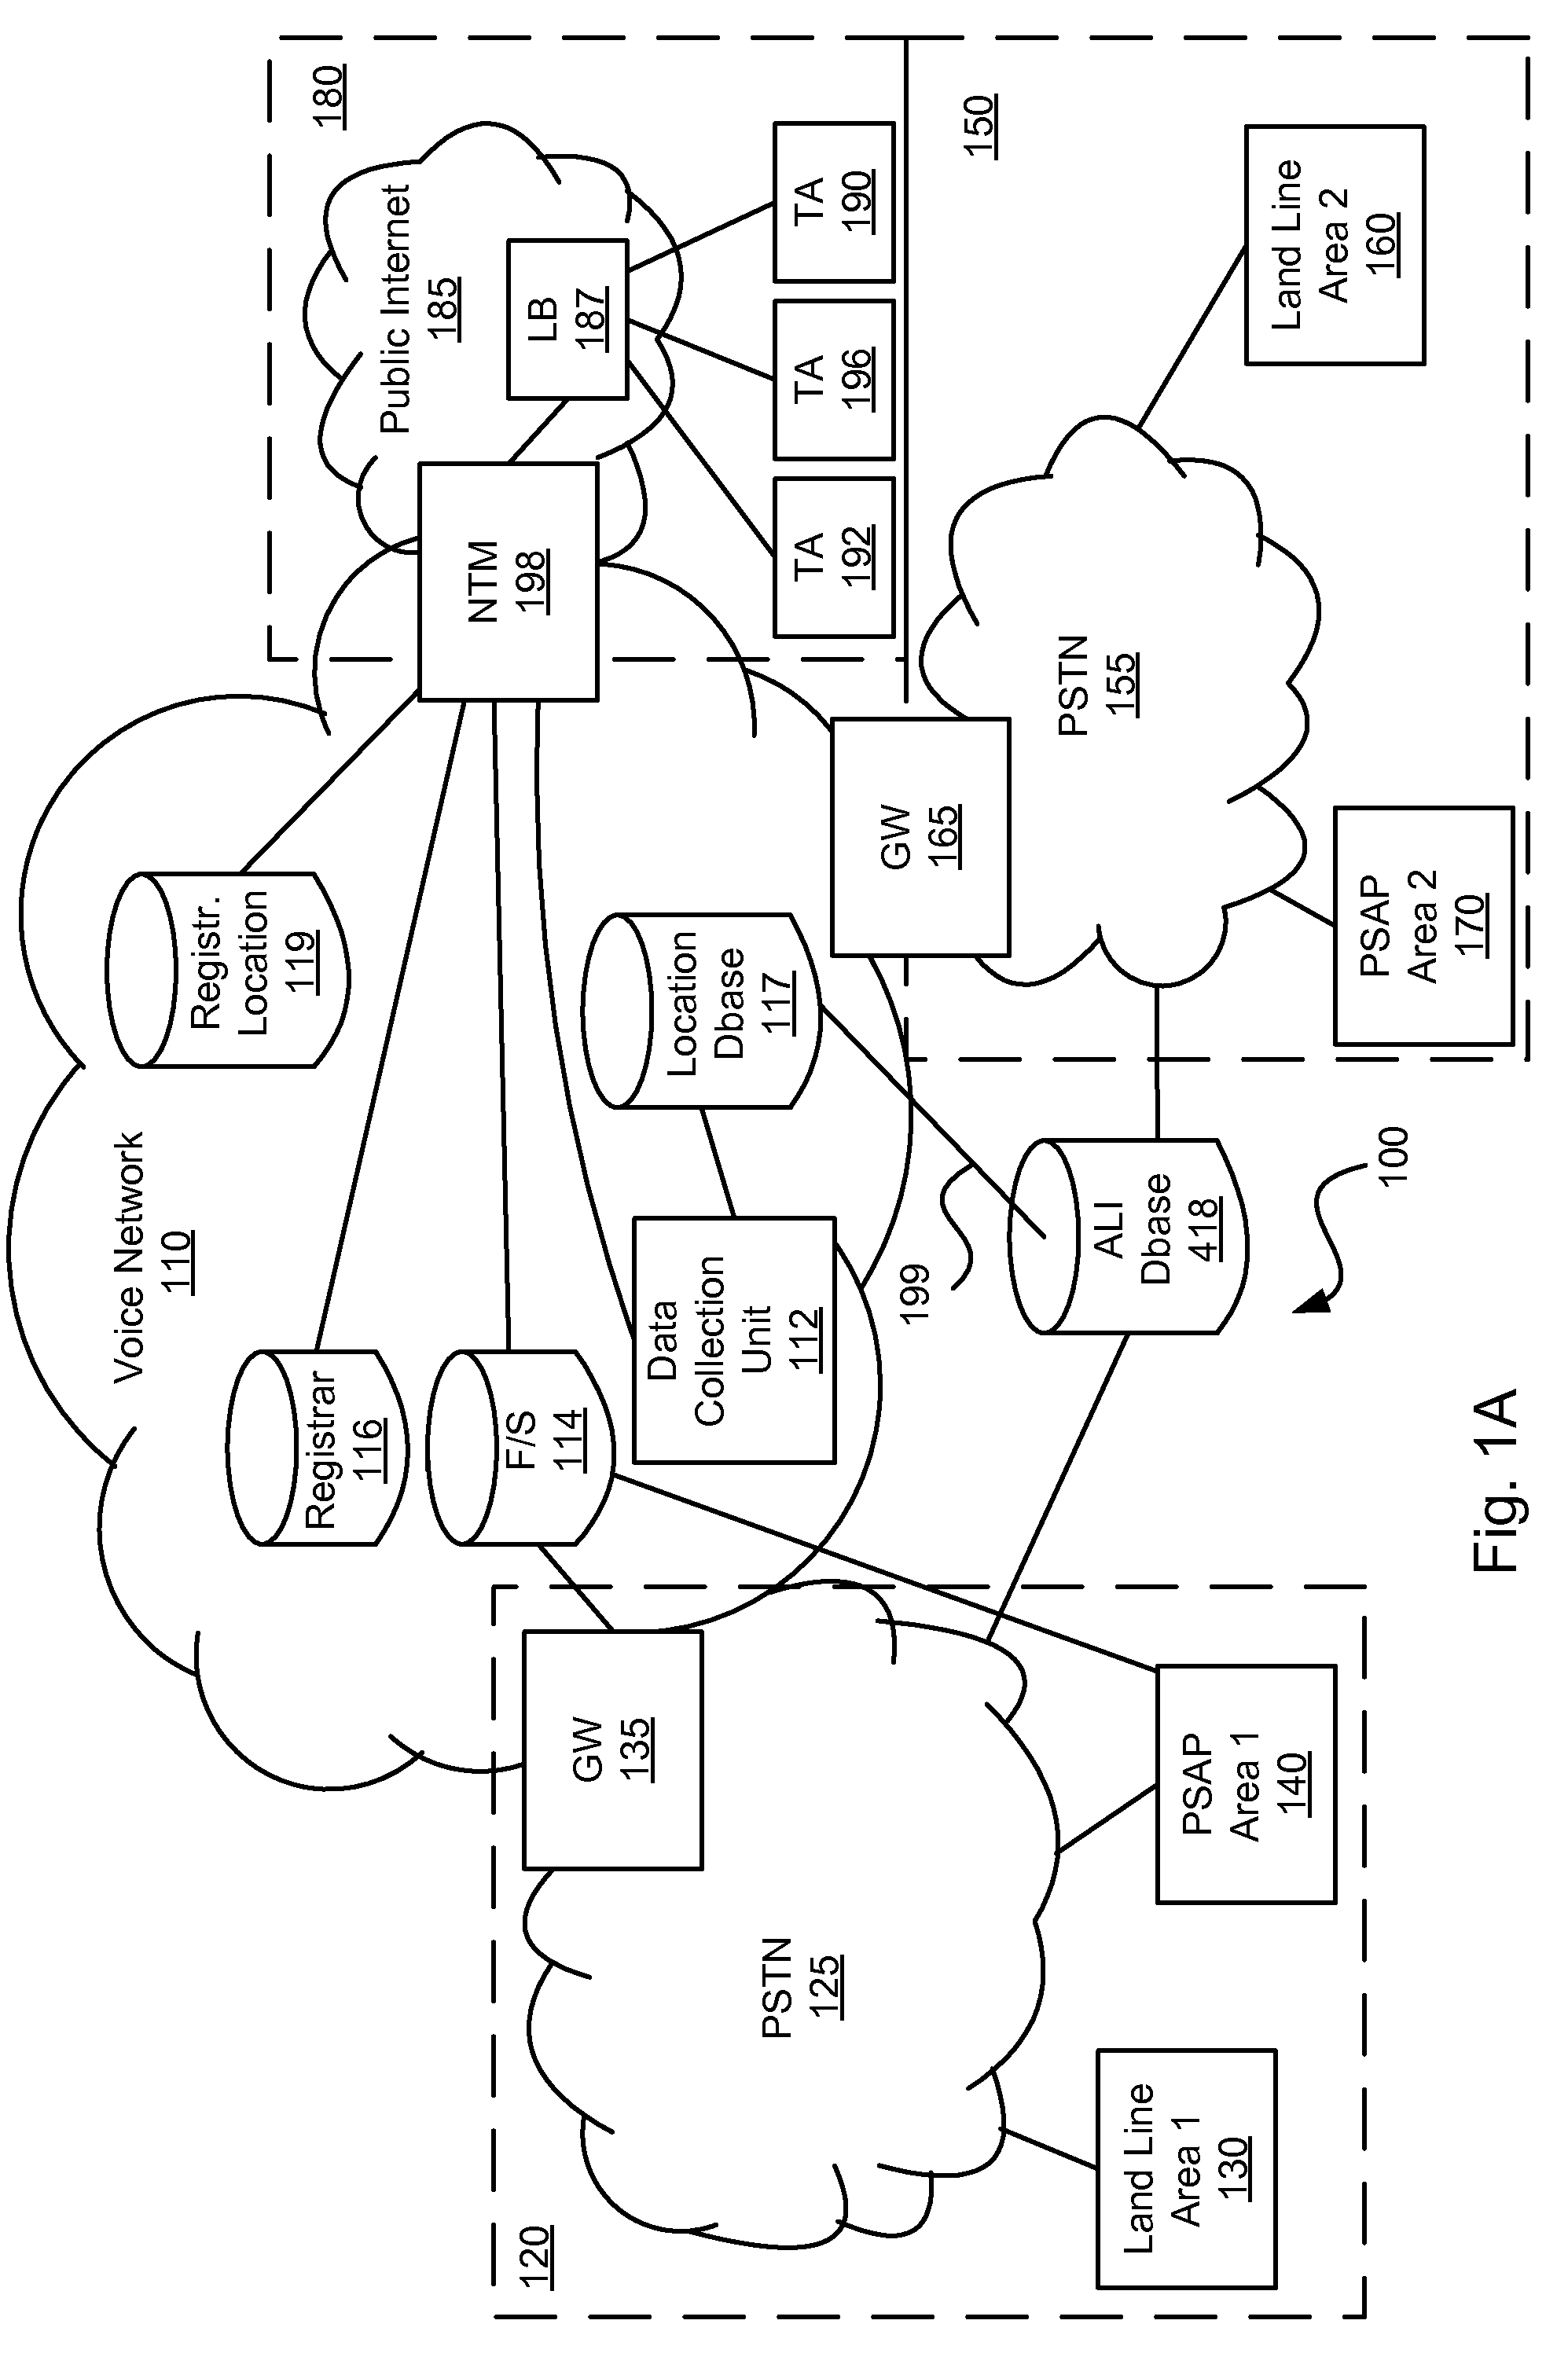 Systems and Methods for Third Party Emergency Call Termination